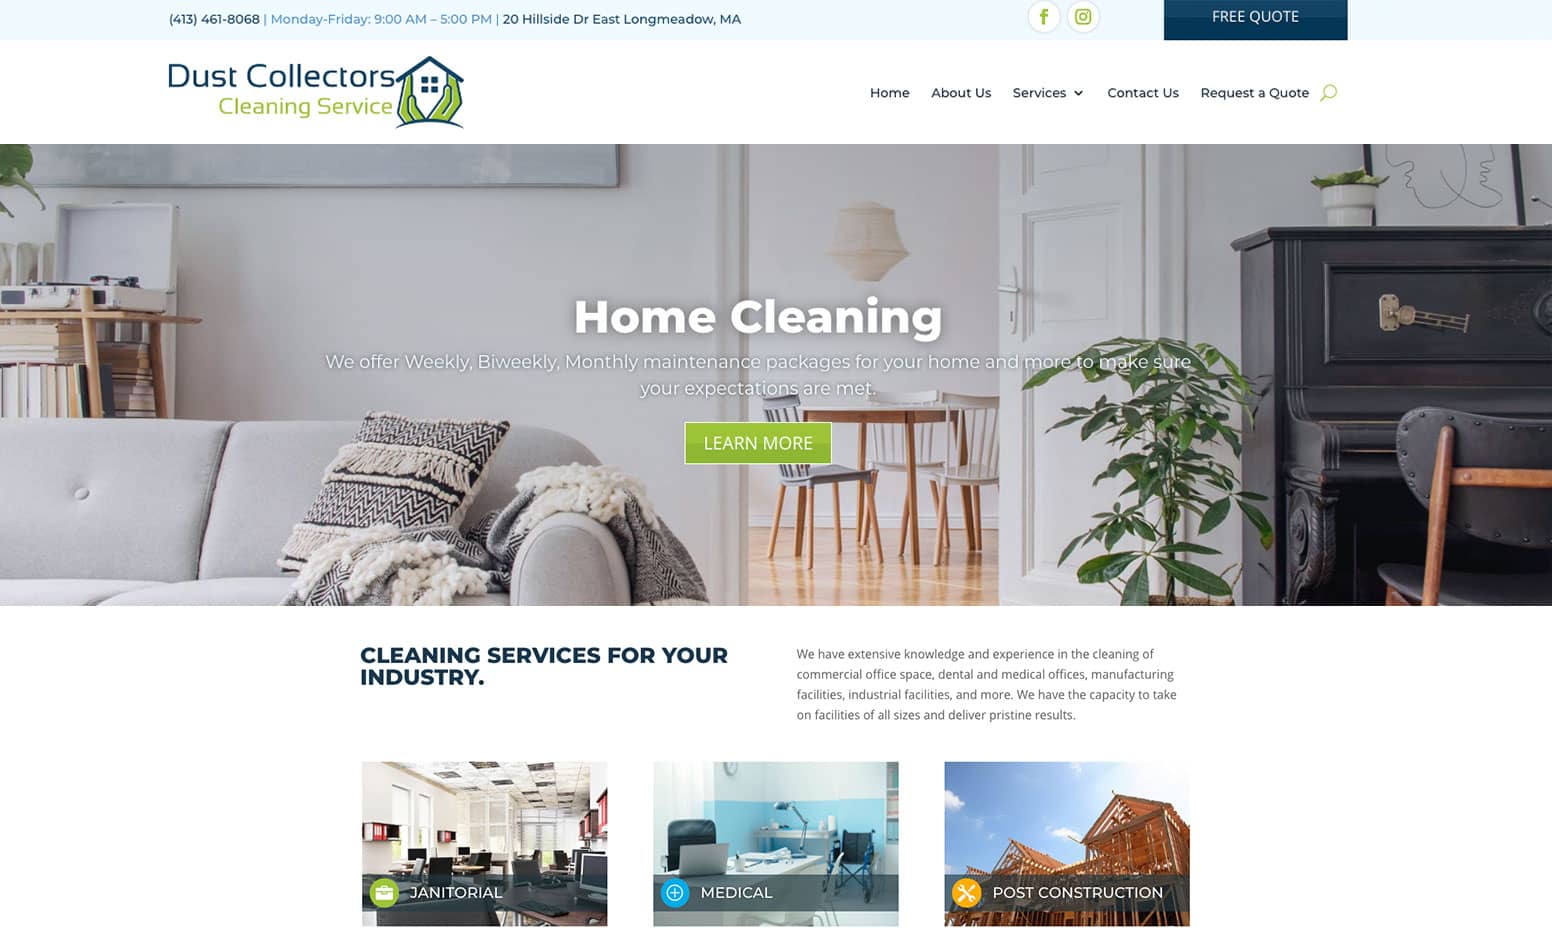 Dust Collectors Cleaning Service website, web design company MA, web design company Western MA, web design company CT, marketing agency CT